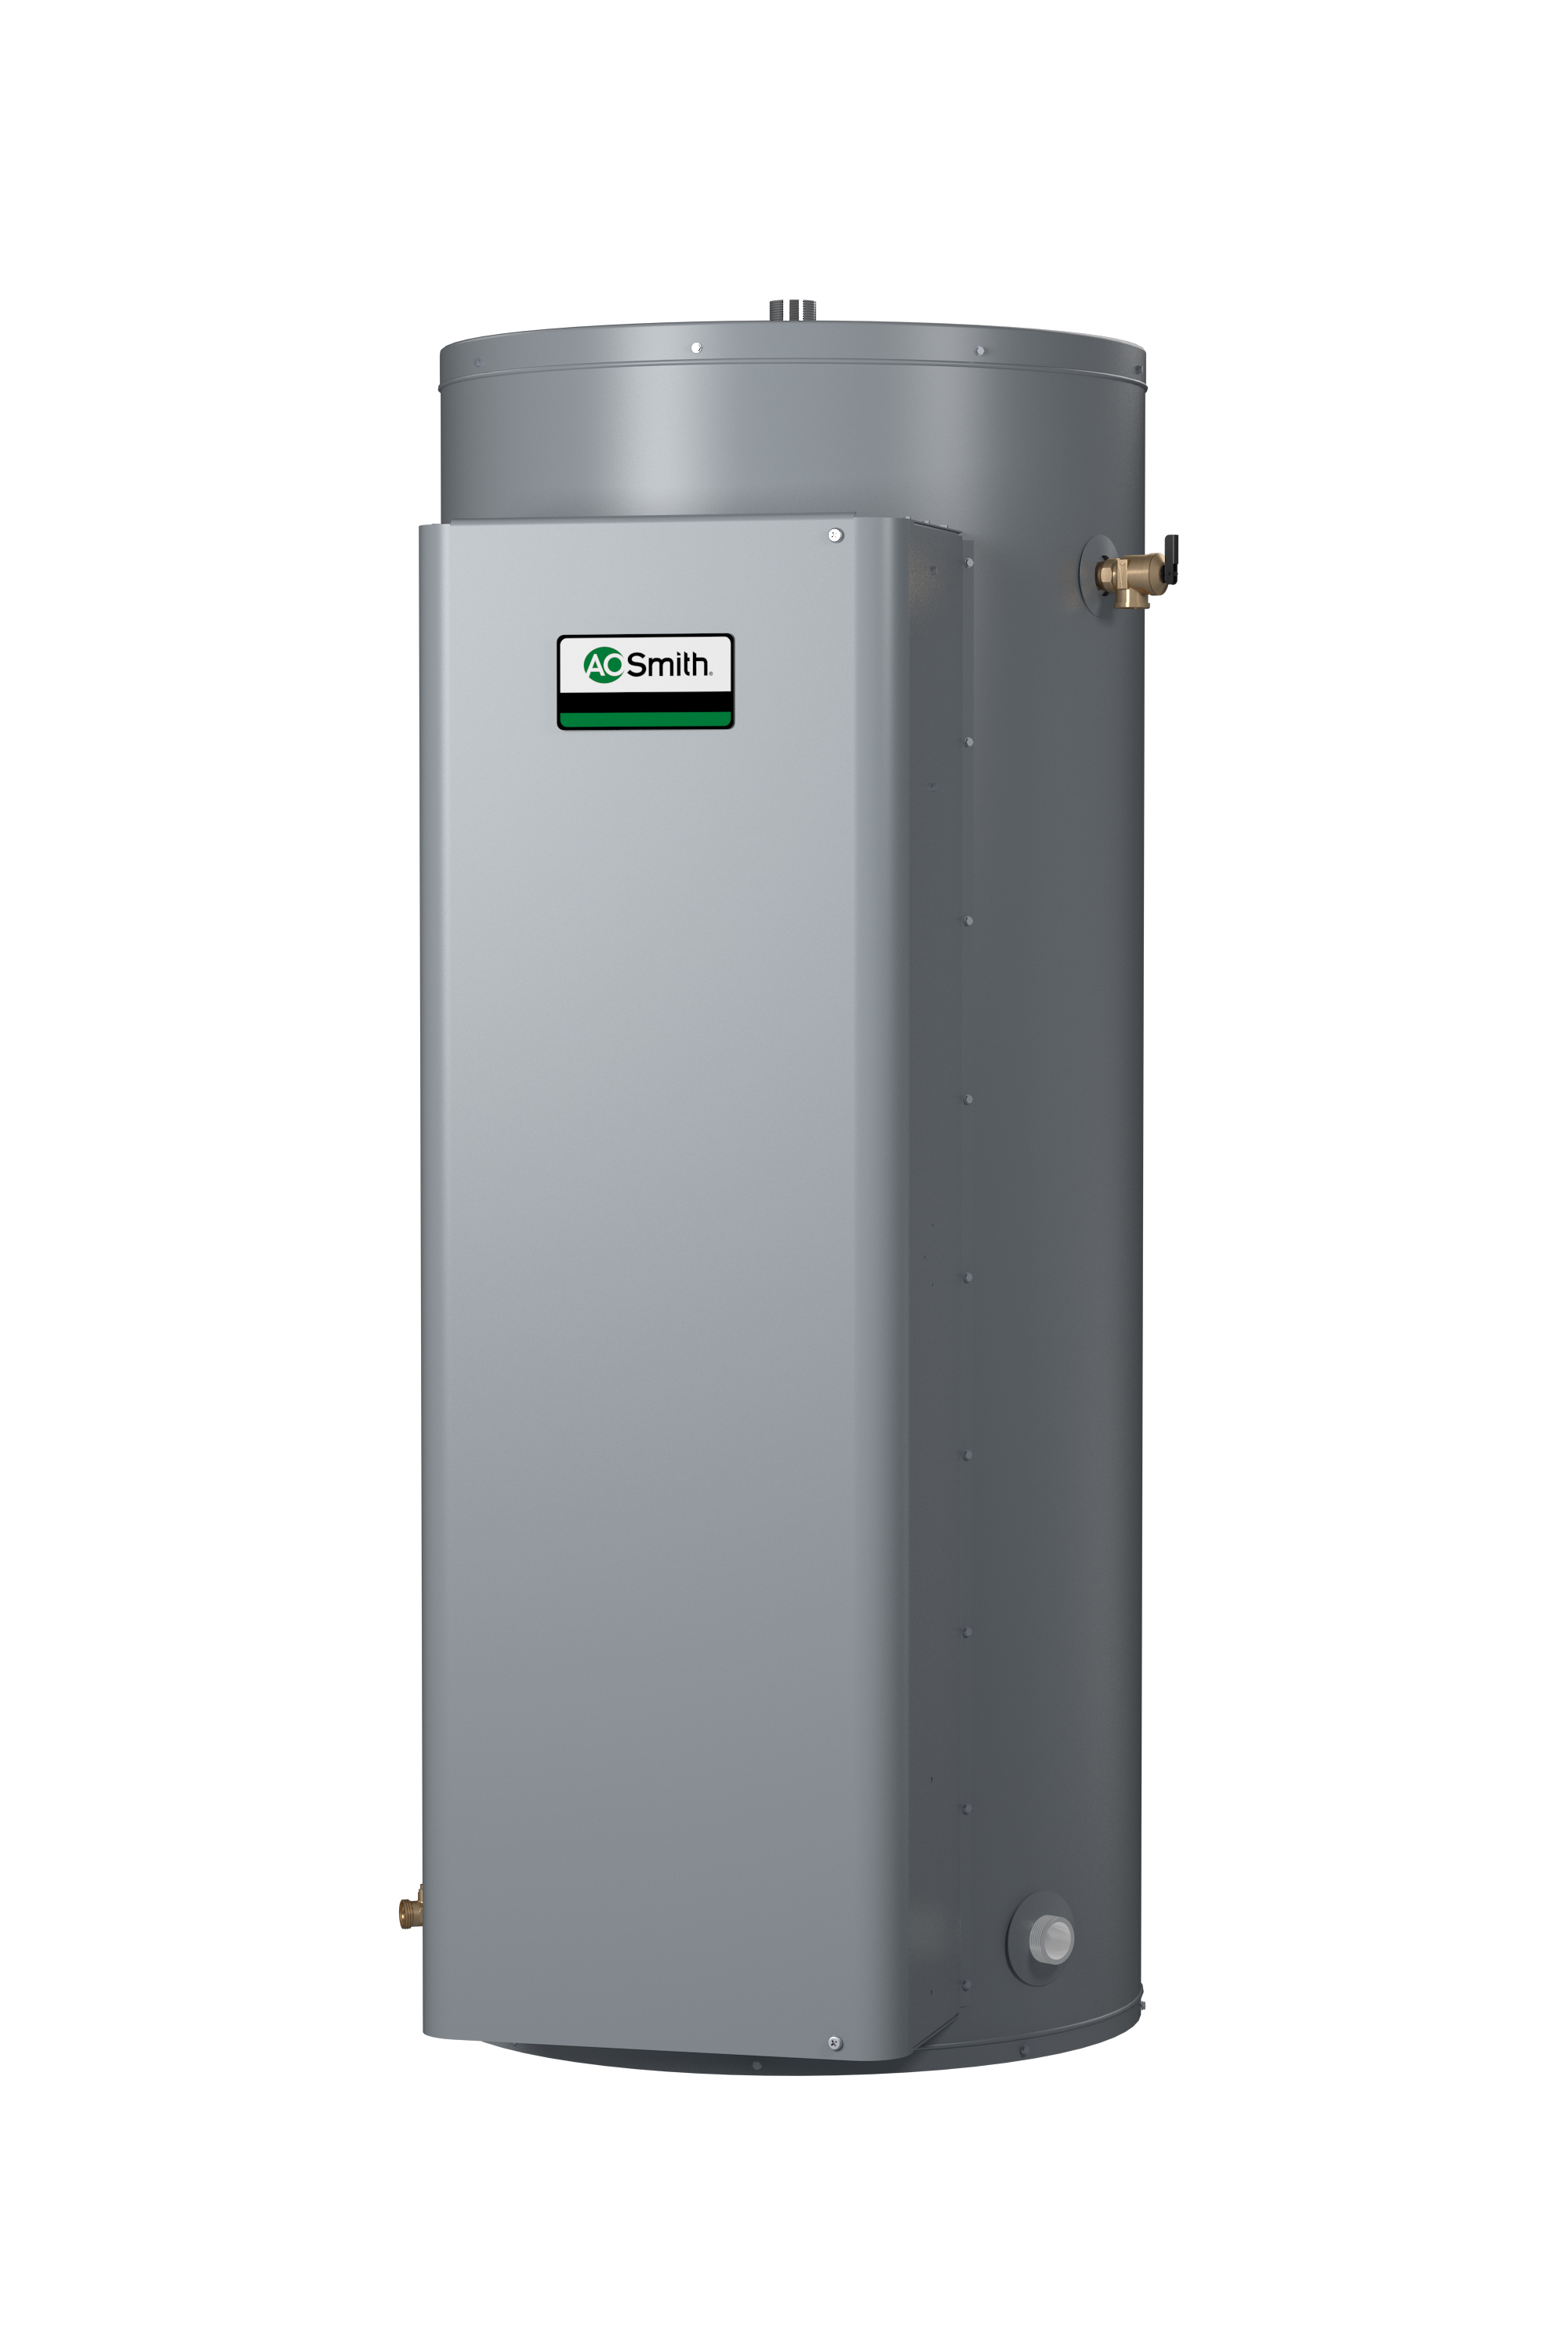 AO SMITH DRE-120-24, 119 GALLON, 24.0KW, 277 VOLT, 86.6 AMPS, 1 PHASE, 6 ELEMENT, COMMERCIAL ELECTRIC WATER HEATER, GOLD SERIES